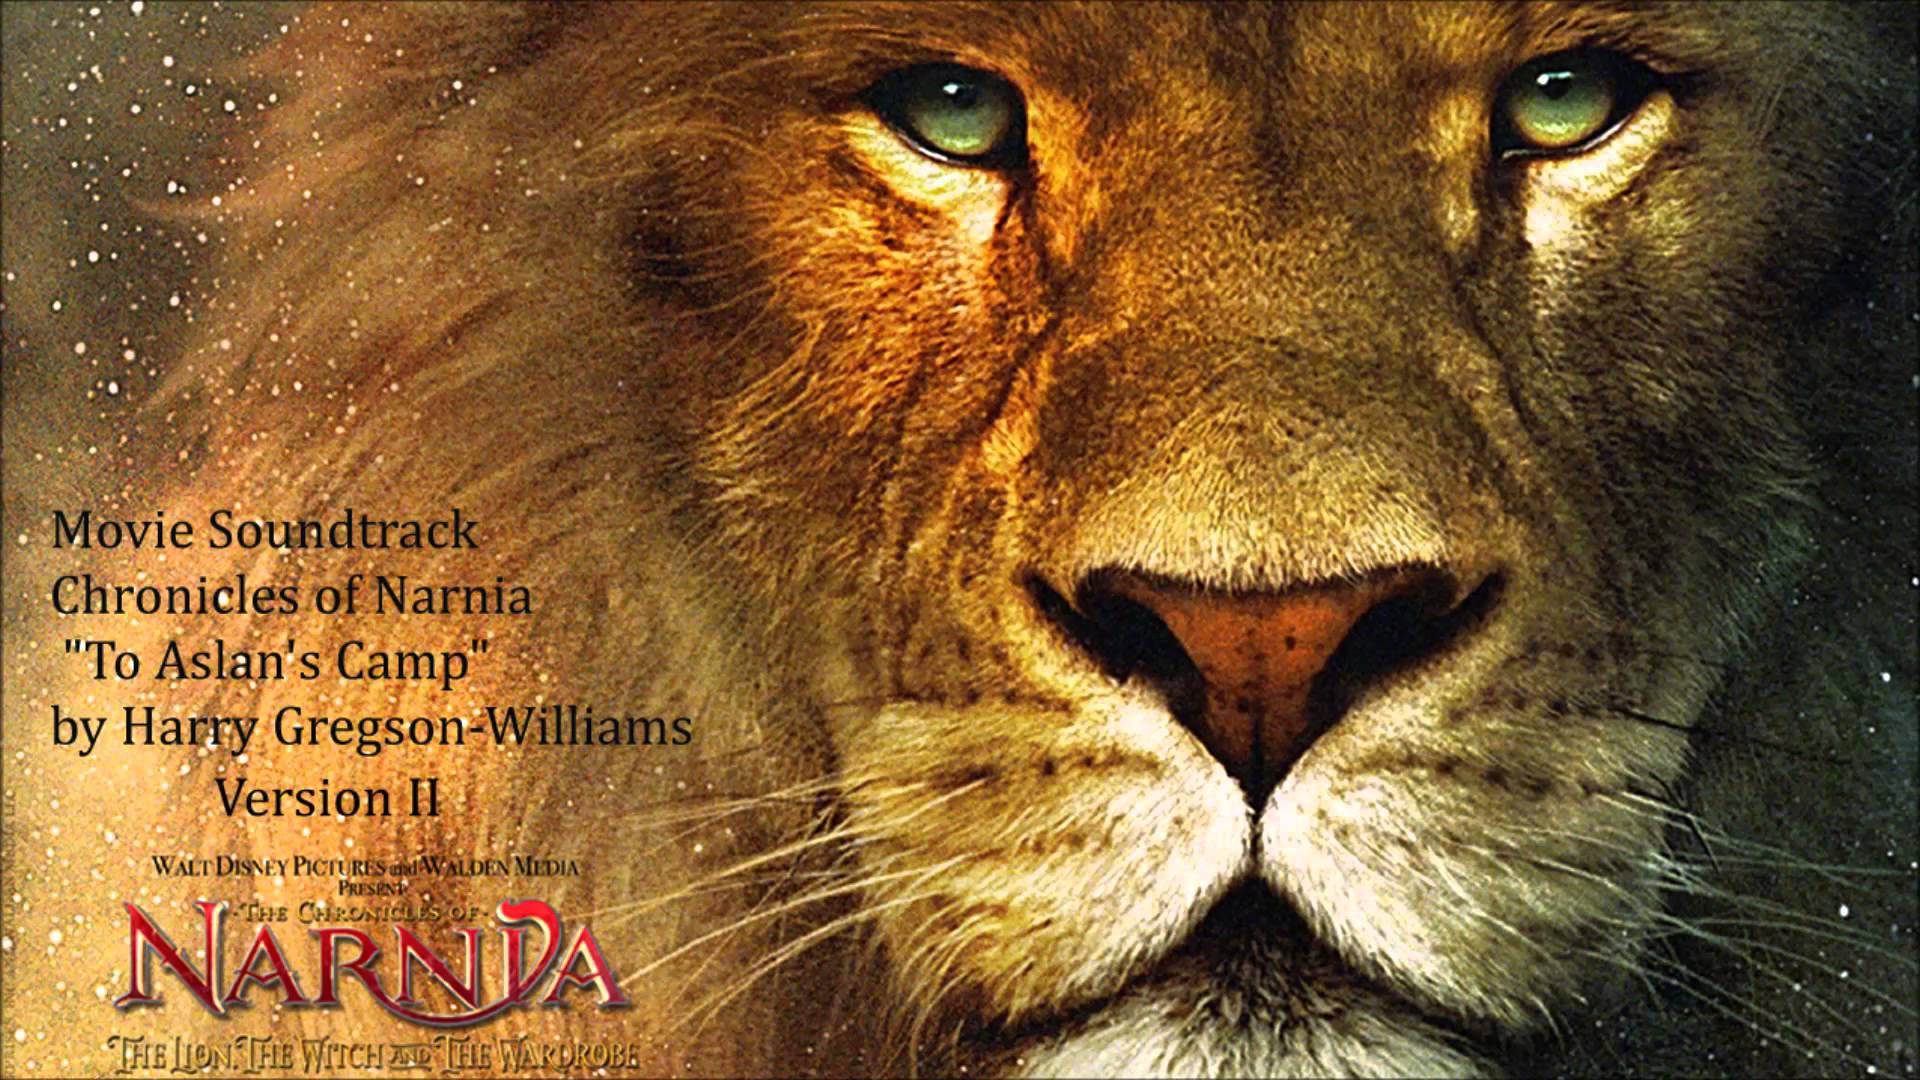 Movie Soundtrack - Chronicles of Narnia - To Aslans Camp by